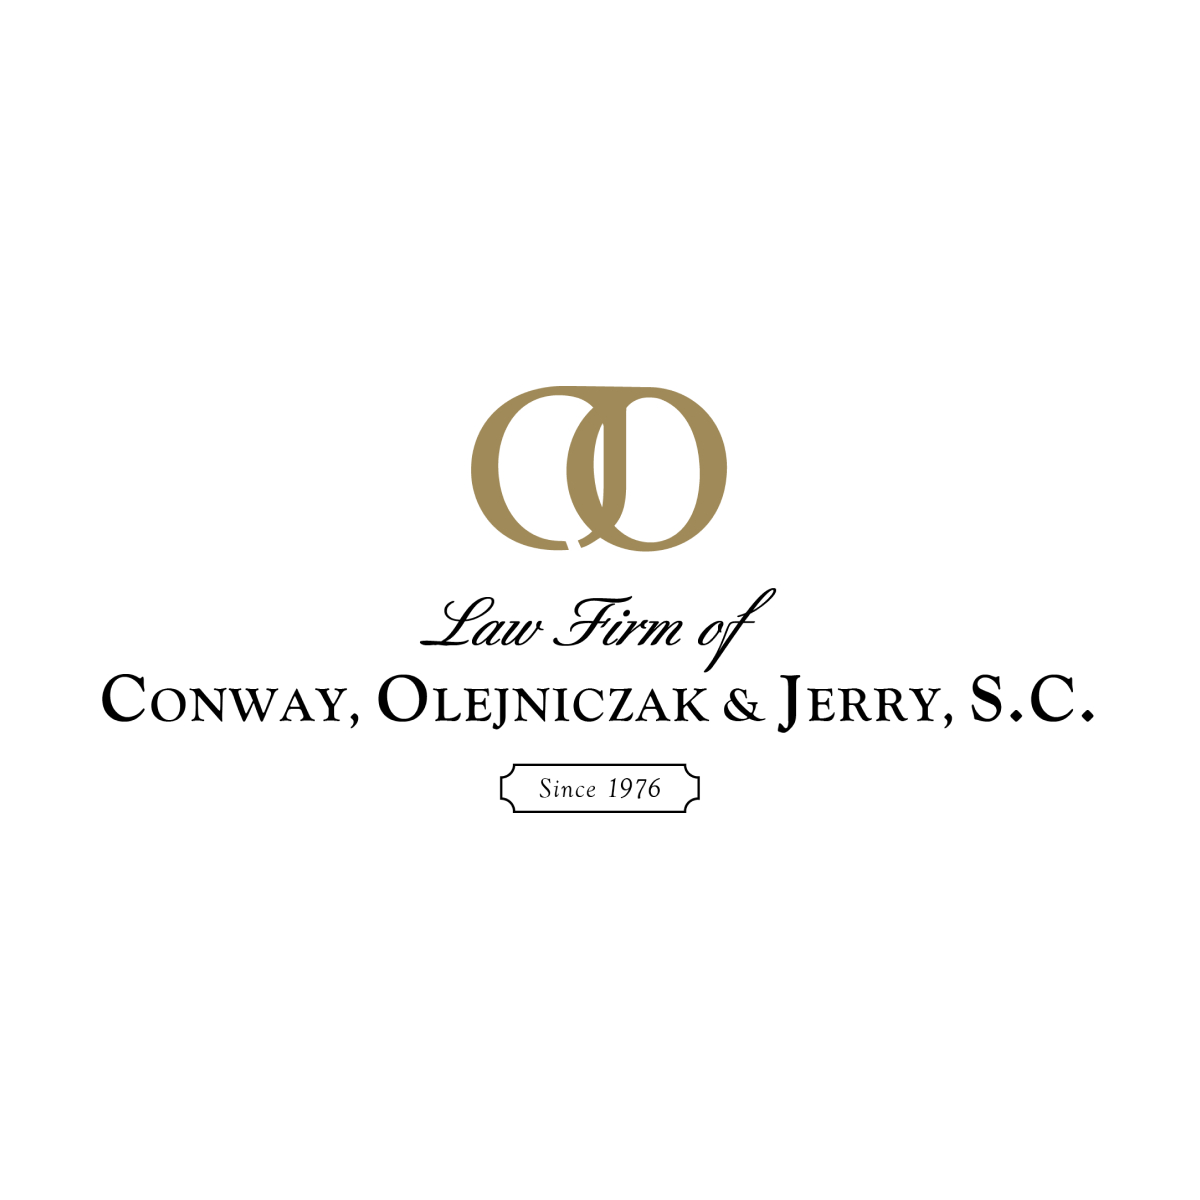 Emotional Support Animals in Rental Properties | Law Firm of Conway,  Olejniczak & Jerry, .